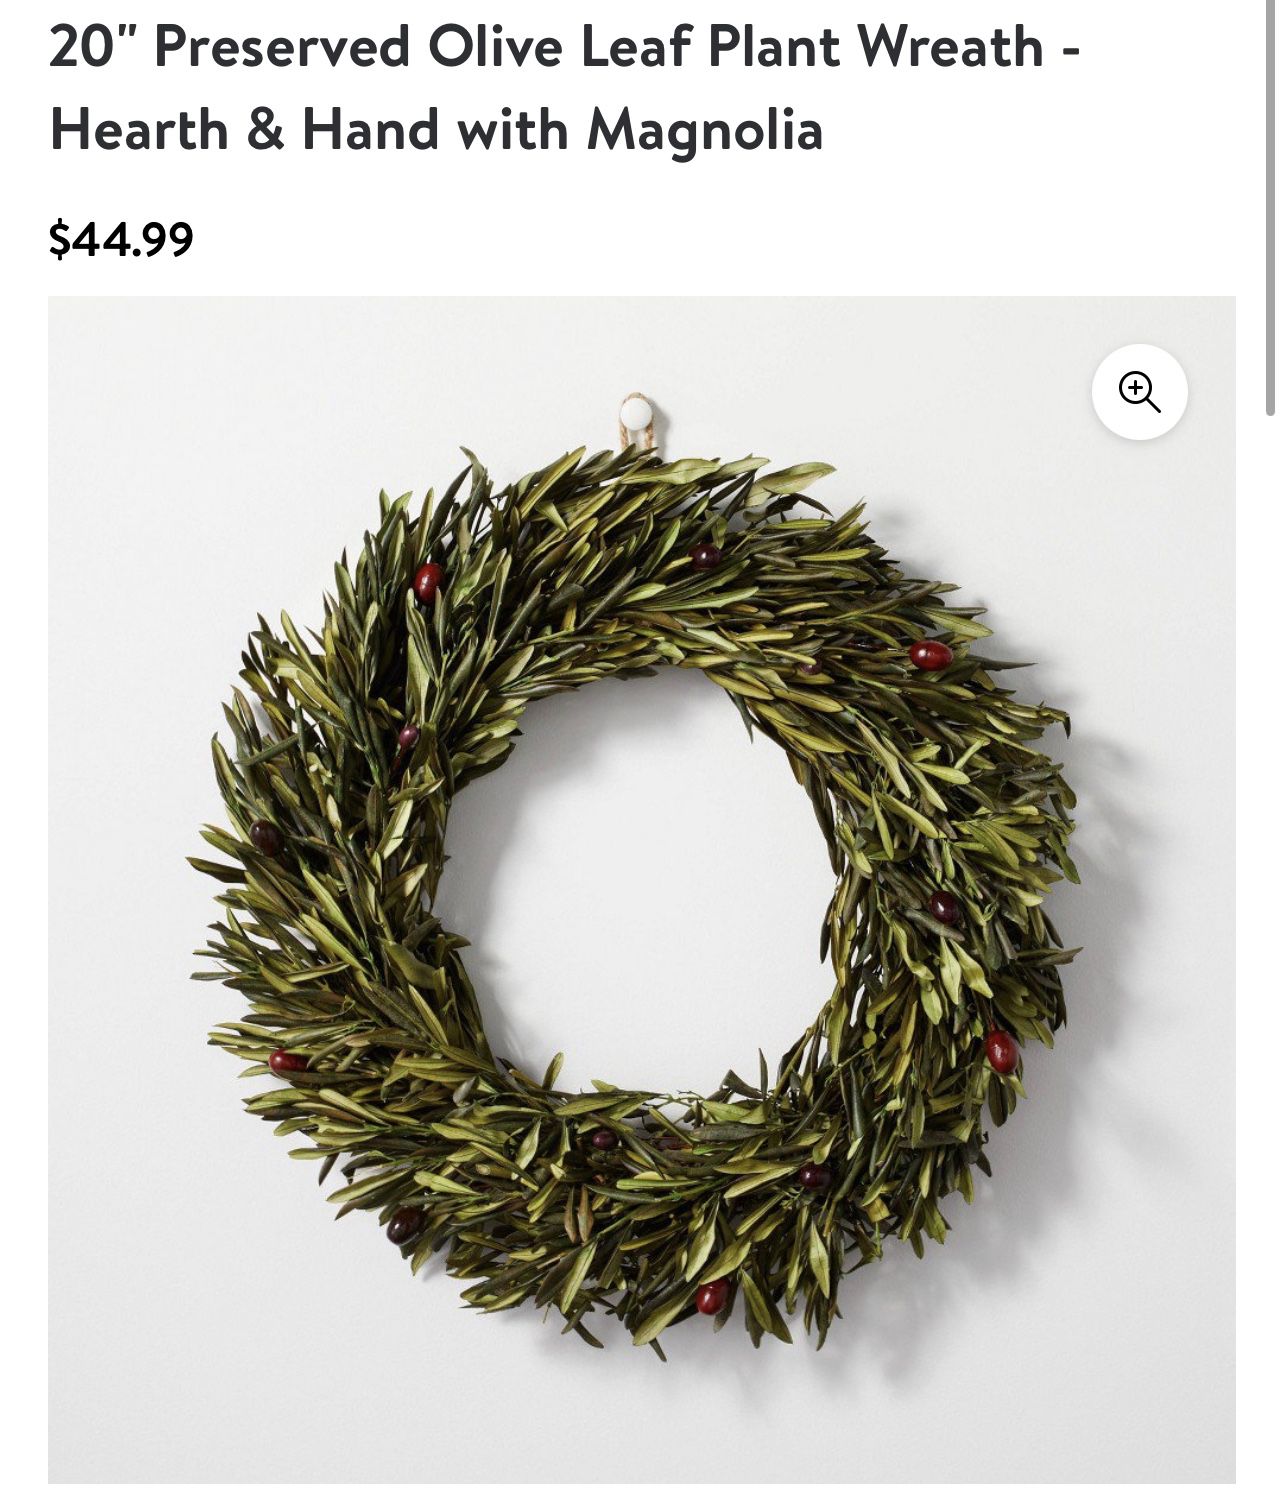 20" Preserved Olive Leaf Plant Wreath - Hearth & Hand with Magnolia